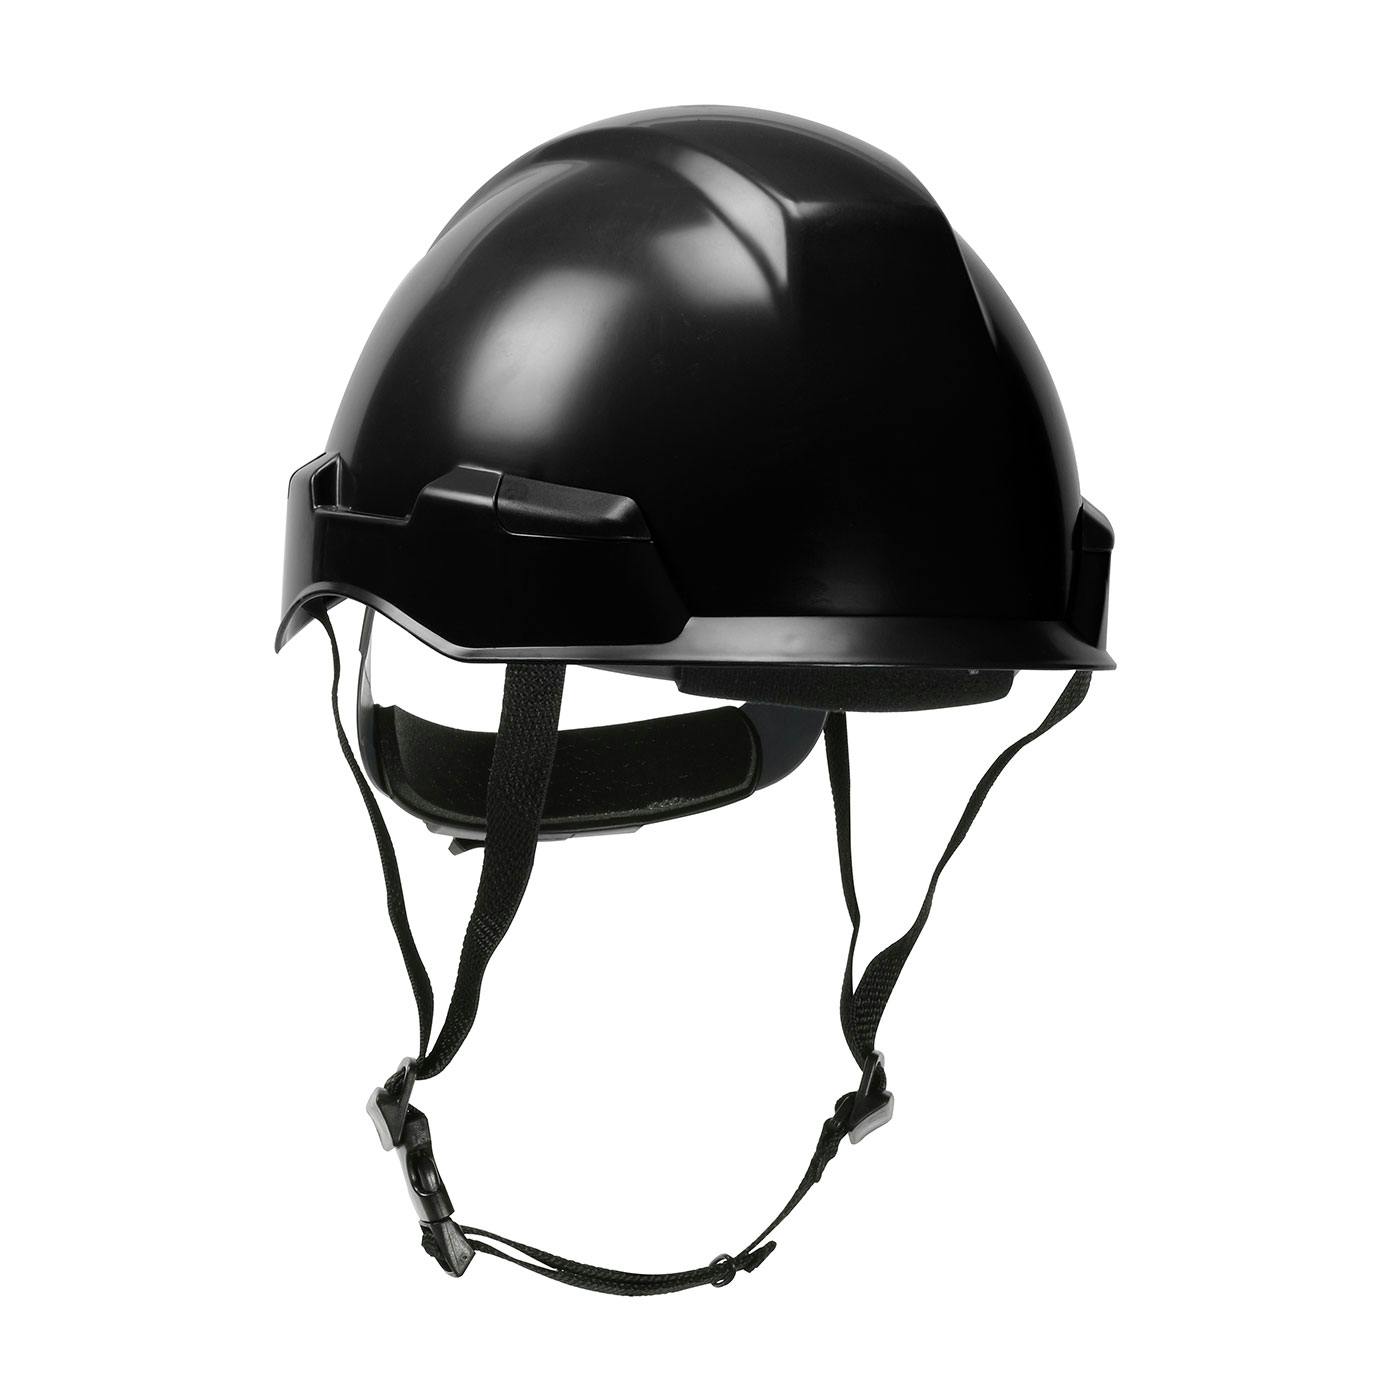 Rocky™ Industrial Climbing Helmet with Polycarbonate / ABS Shell, Hi-Density Foam Impact Liner, Nylon Suspension, Wheel Ratchet Adjustment and 4-Point Chin Strap (280-HP142R)_2